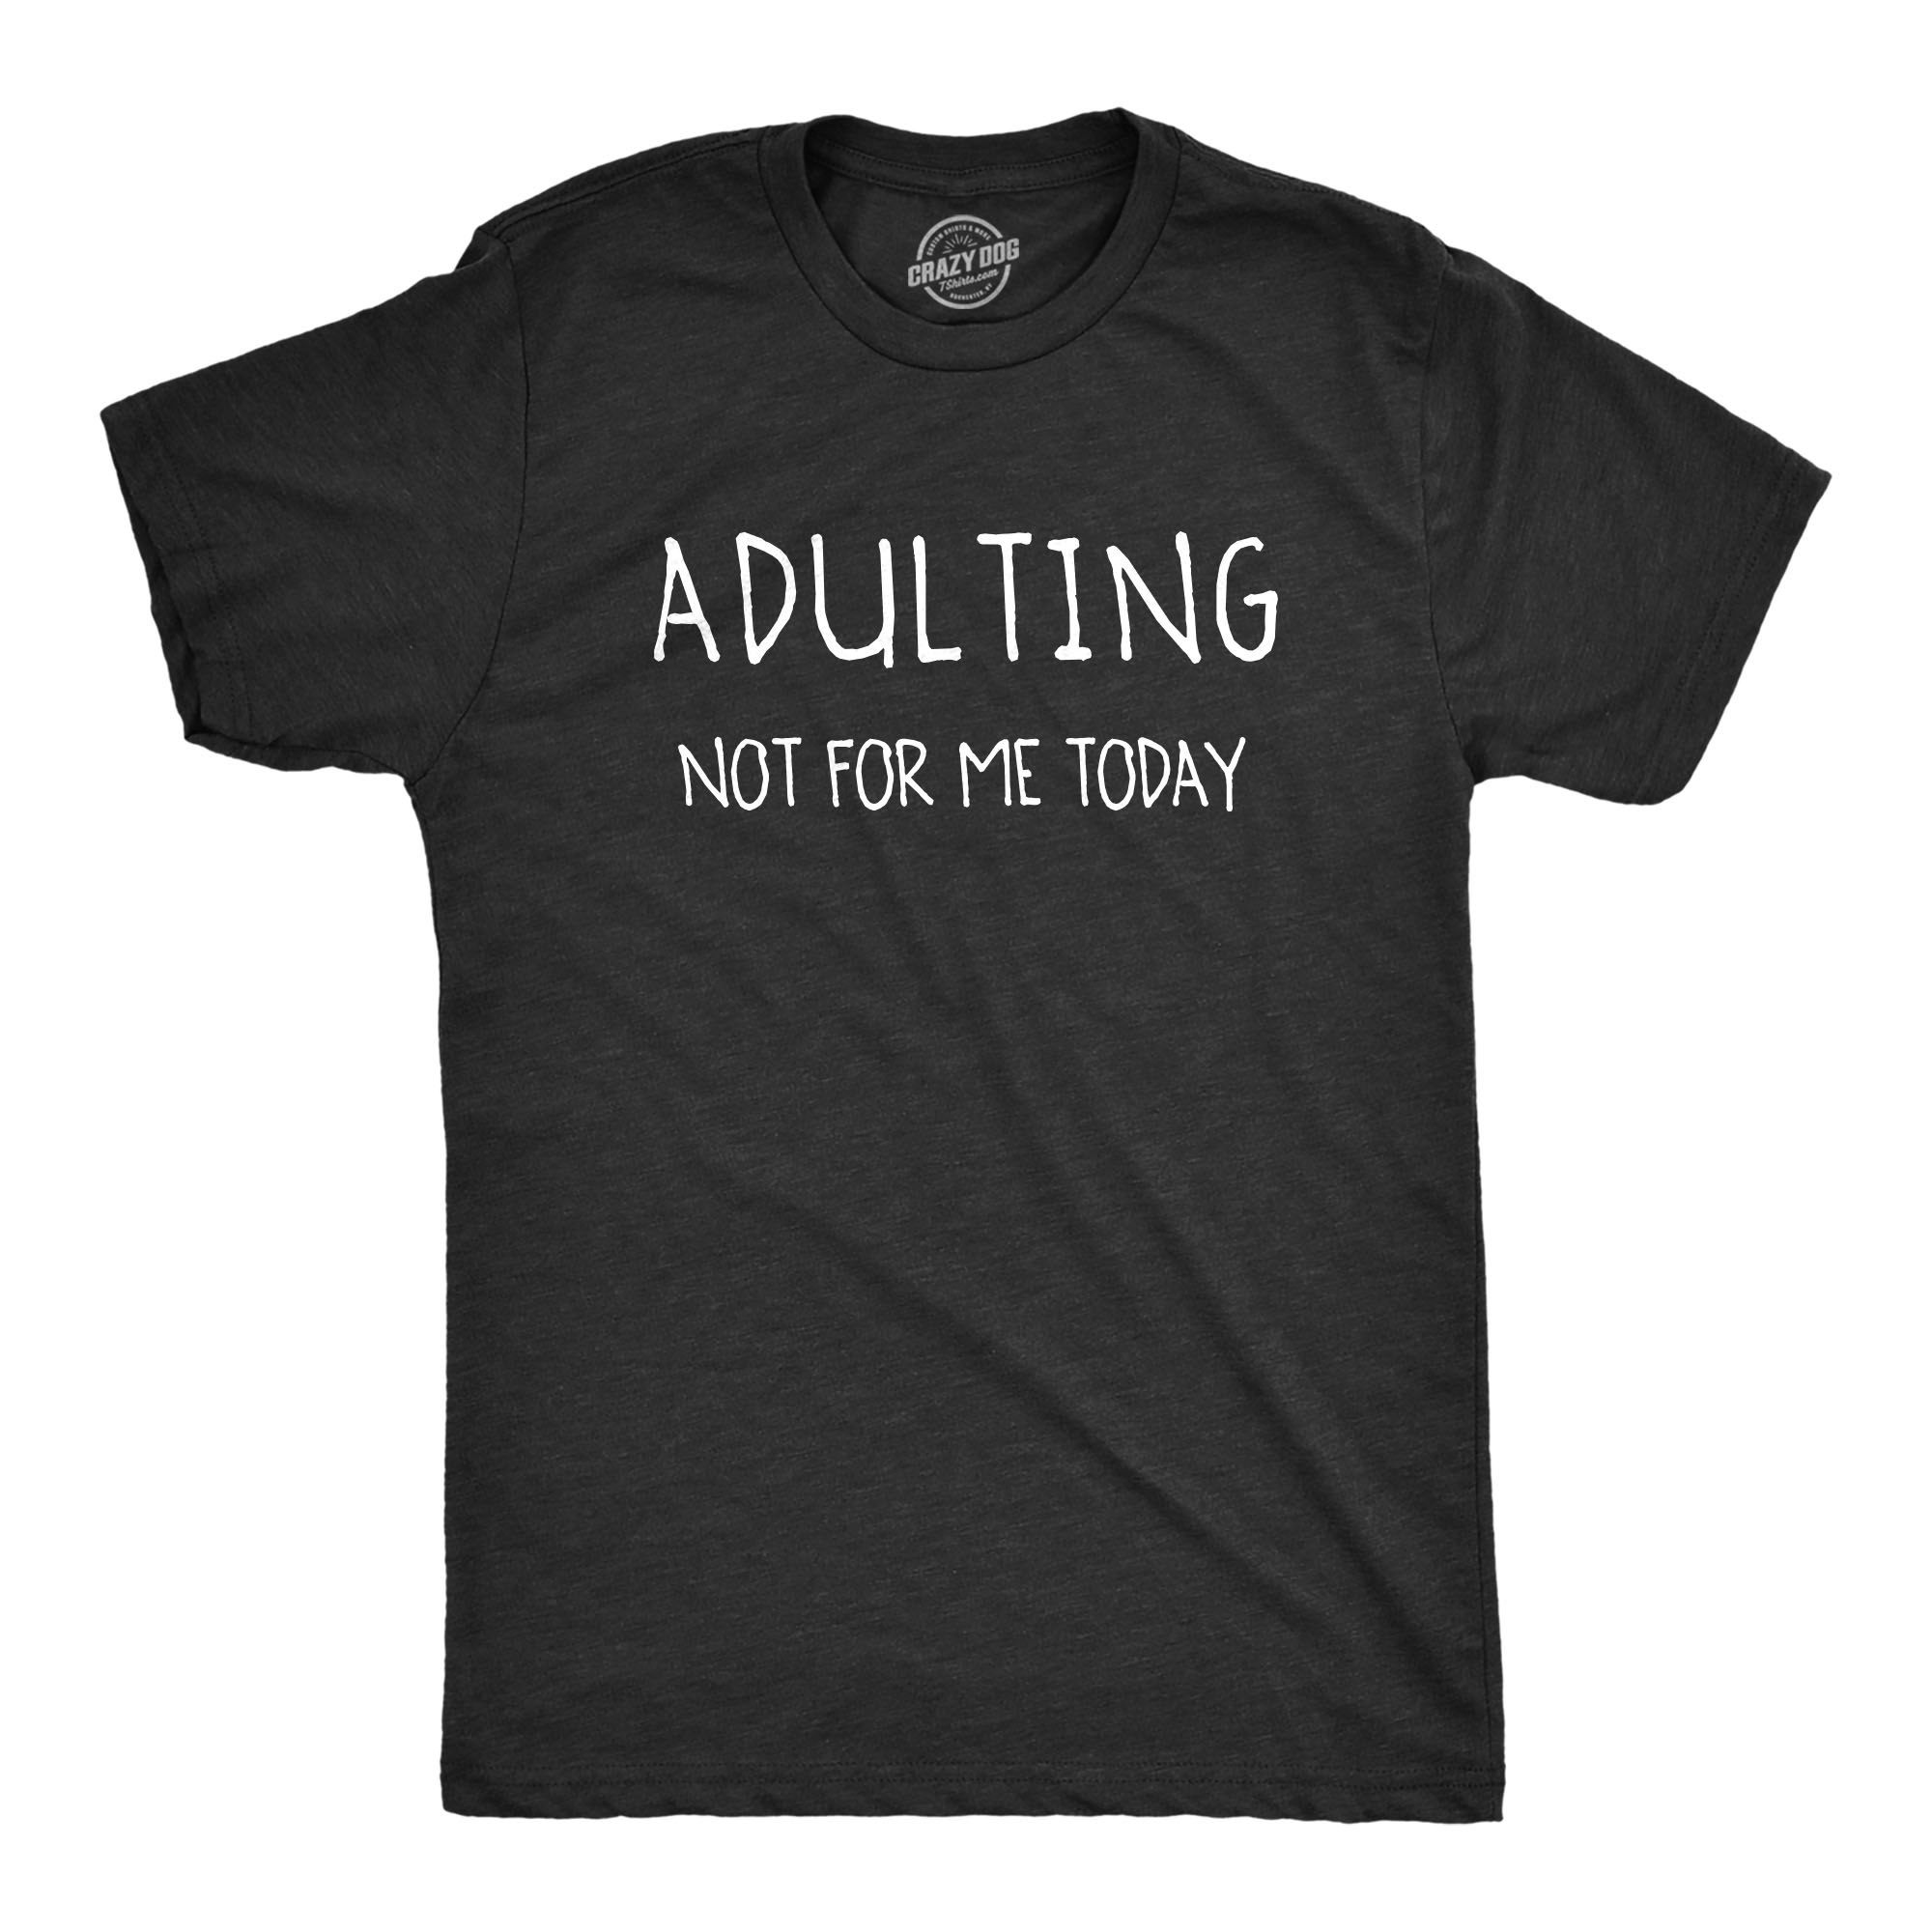 Crazy Dog Tshirts Mens Adulting Not For Me Today Tshirt Funny Sarcastic Self Mocking Adult Tee